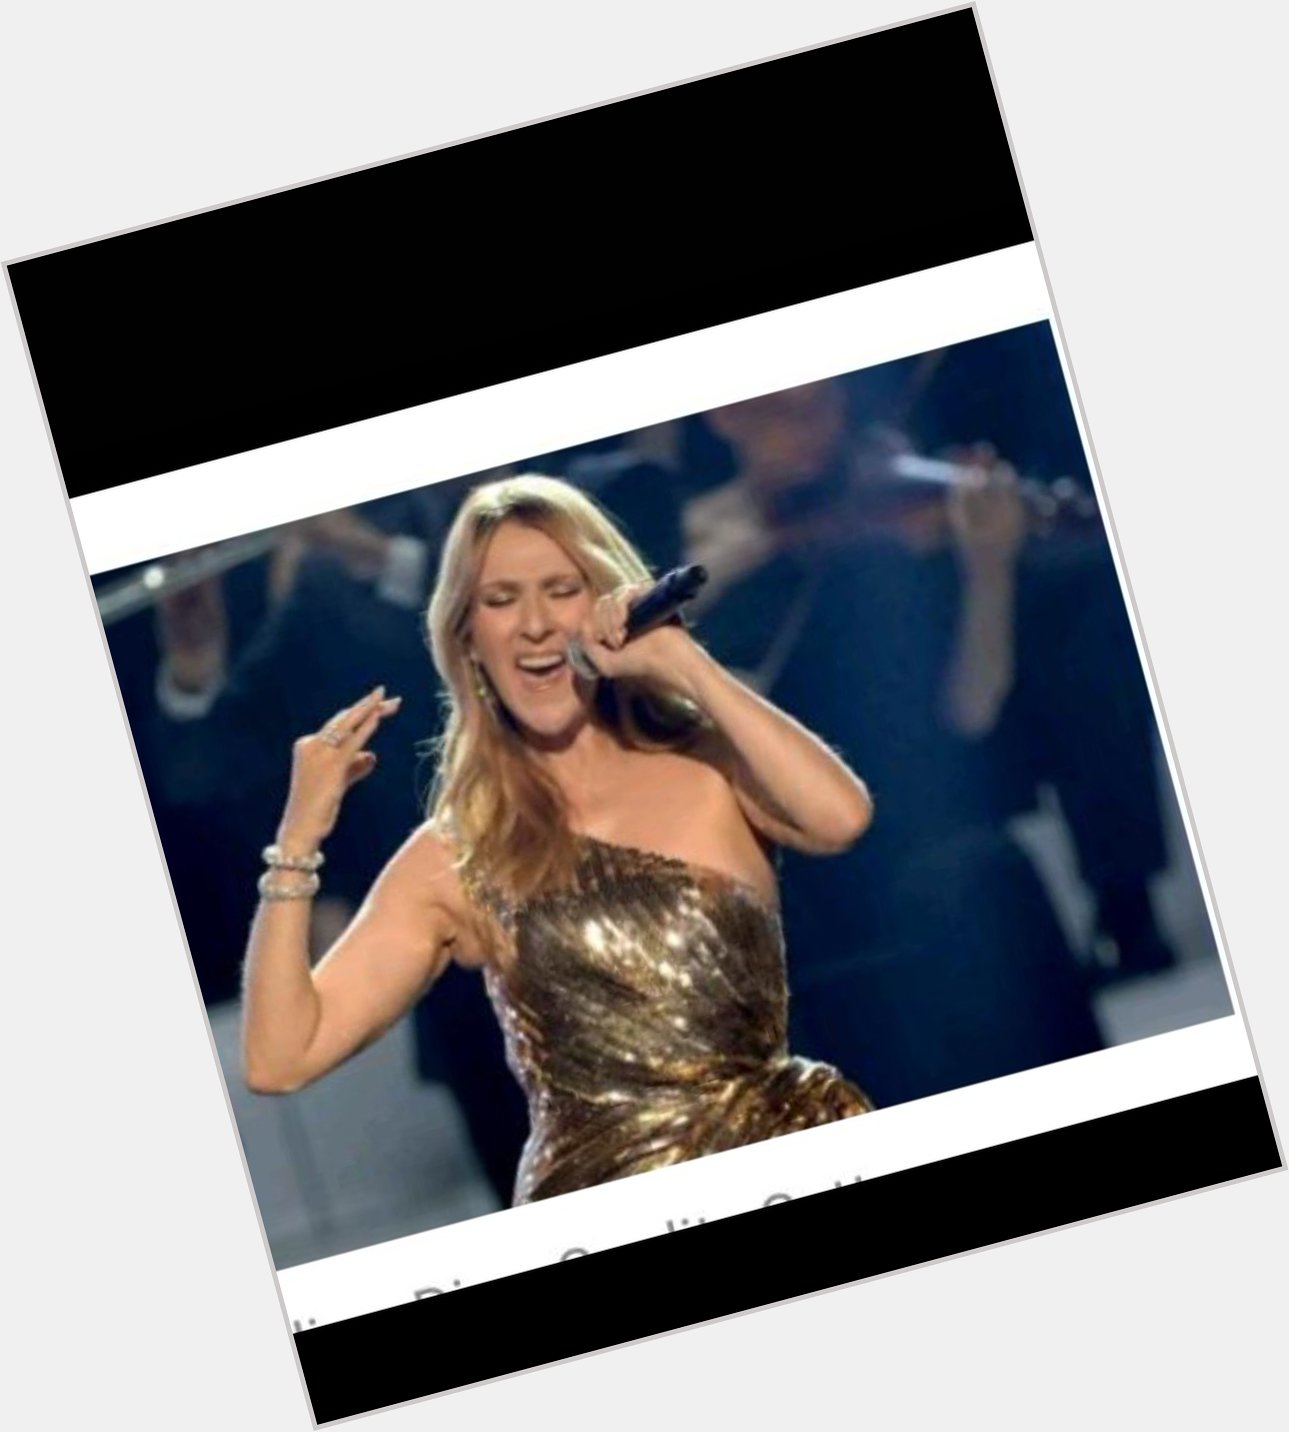 How I love her so much! Happy birthday to you Celine Dion# 